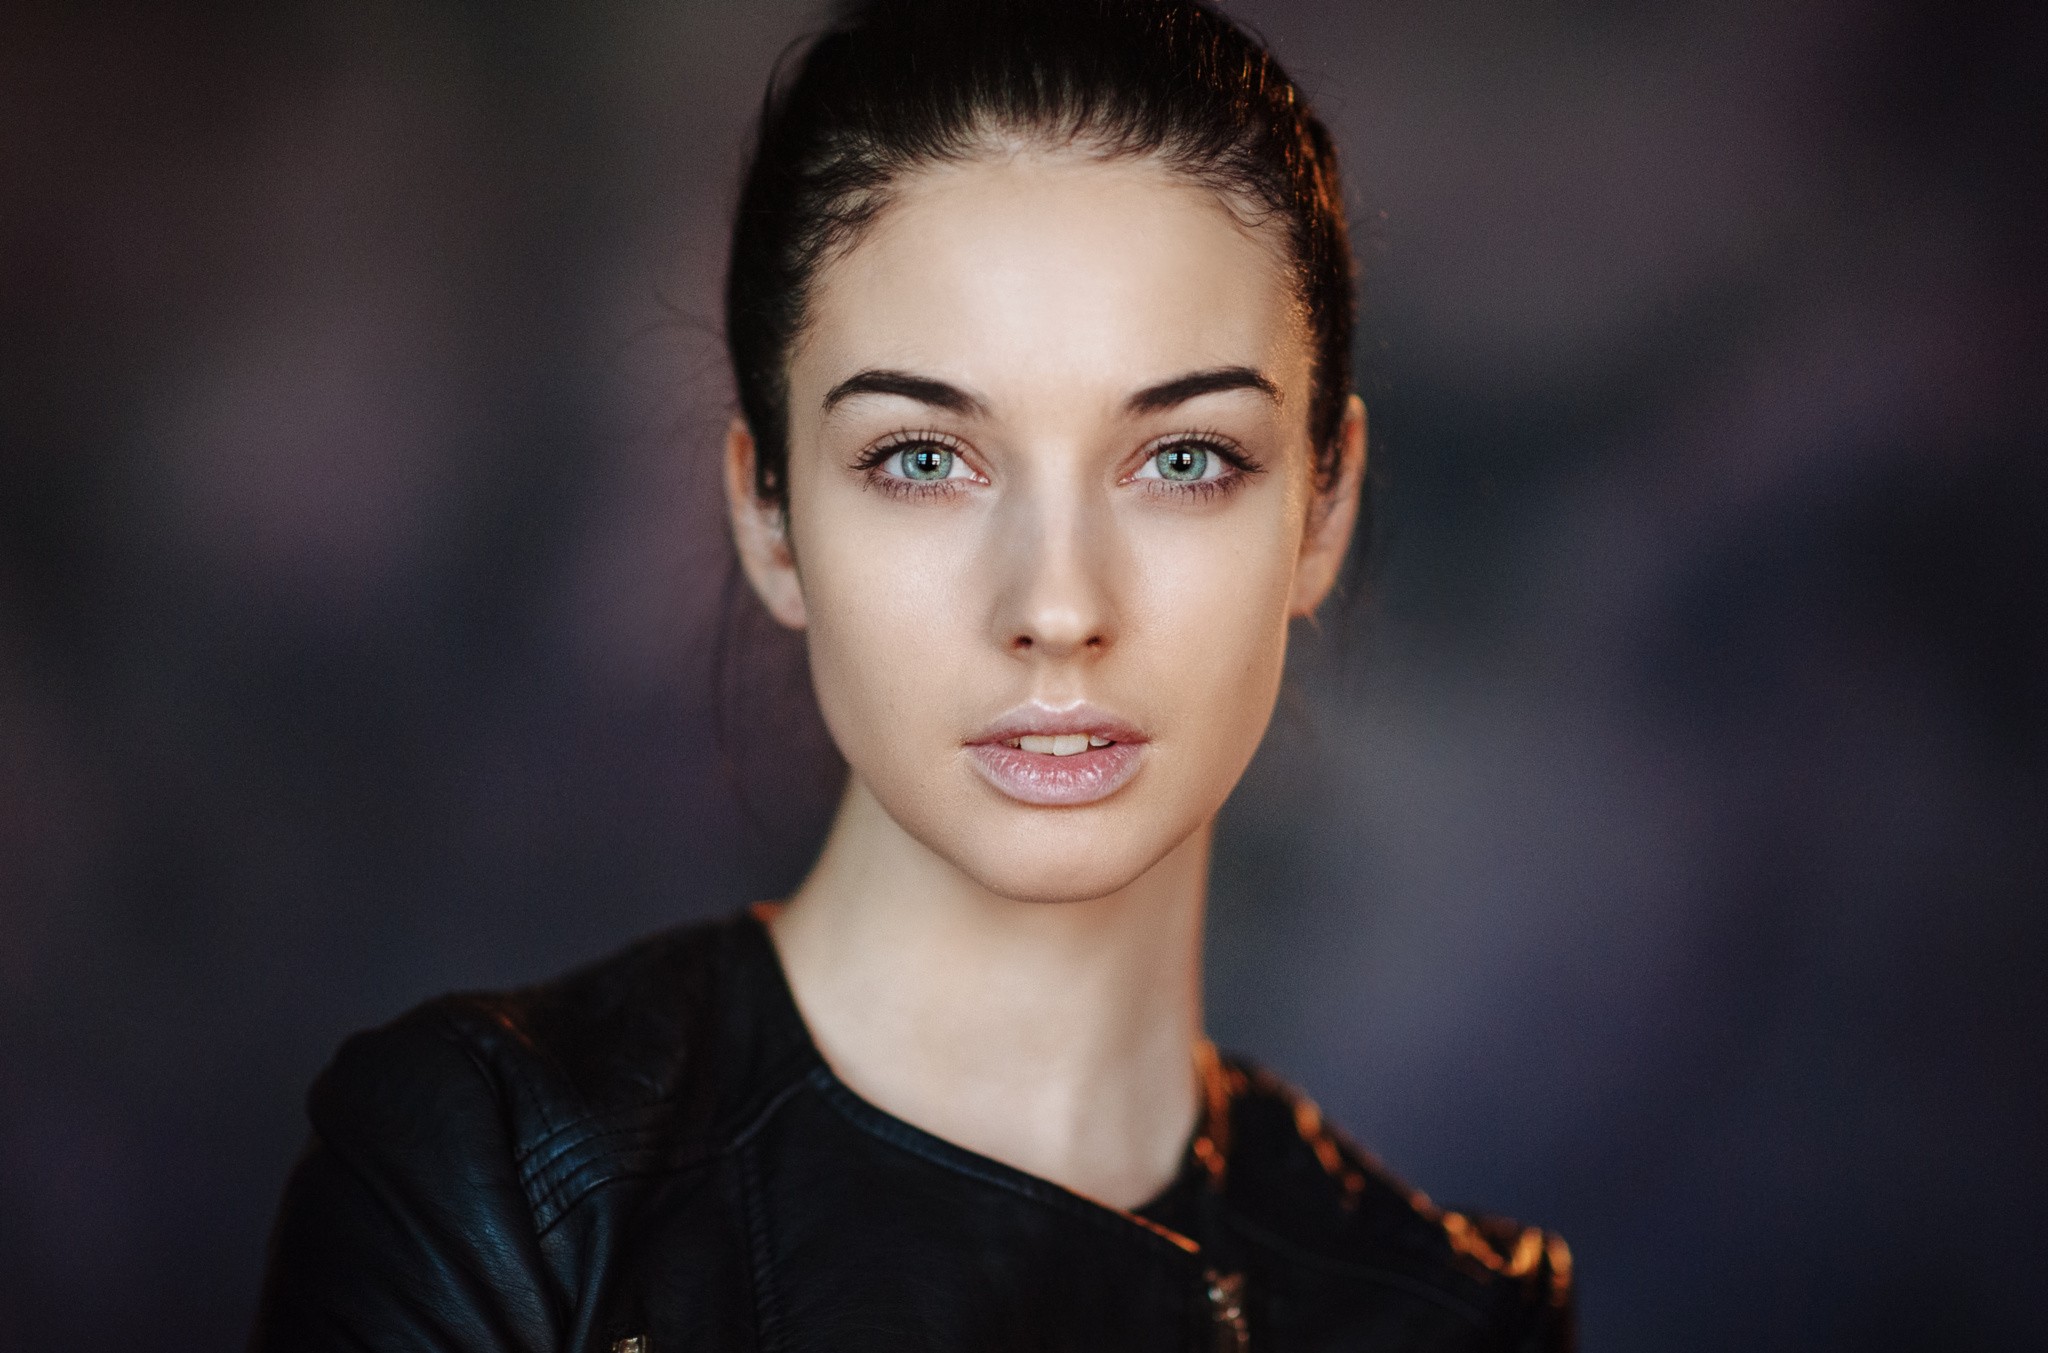 People 2048x1353 Alla Berger women model face portrait Maxim Maximov leather jacket black jackets closeup simple background looking at viewer black clothing brunette